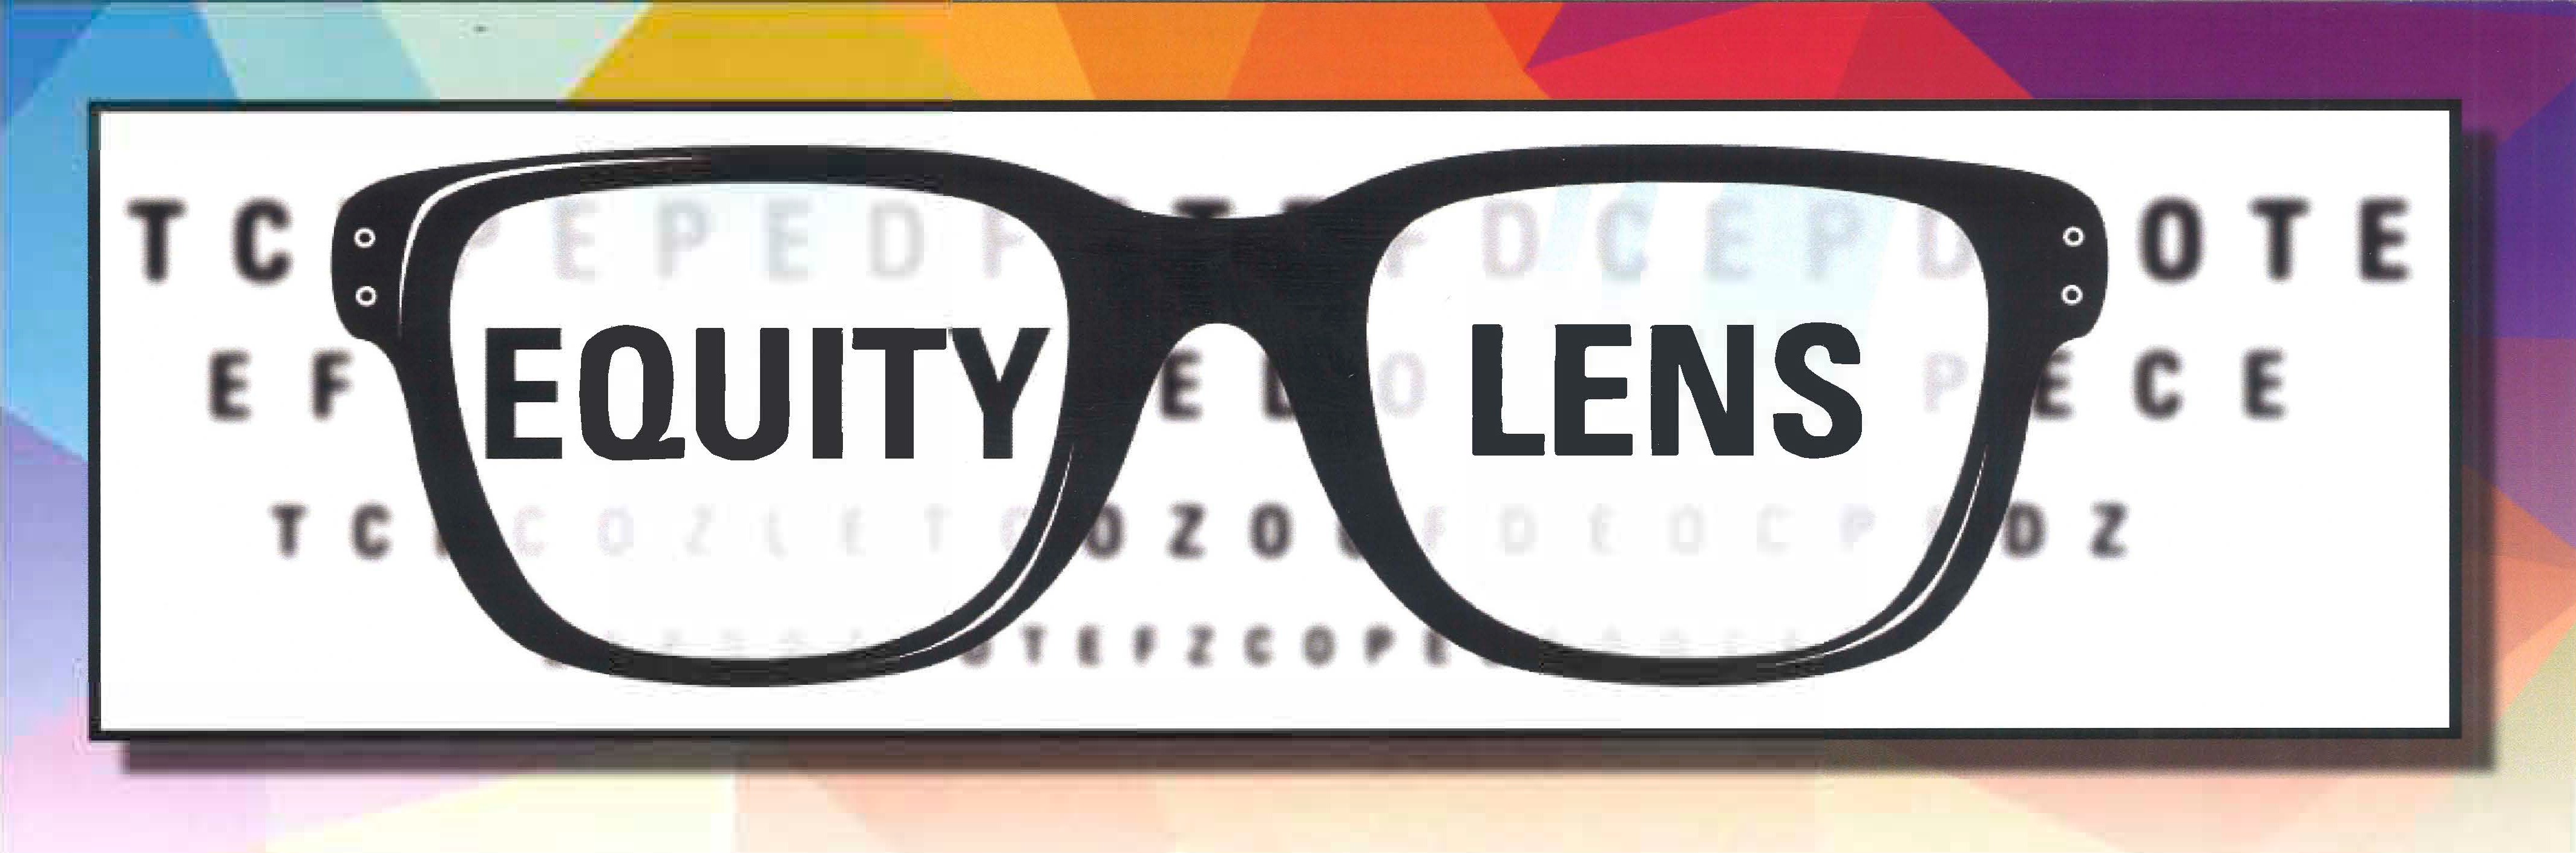 equity lense poster top